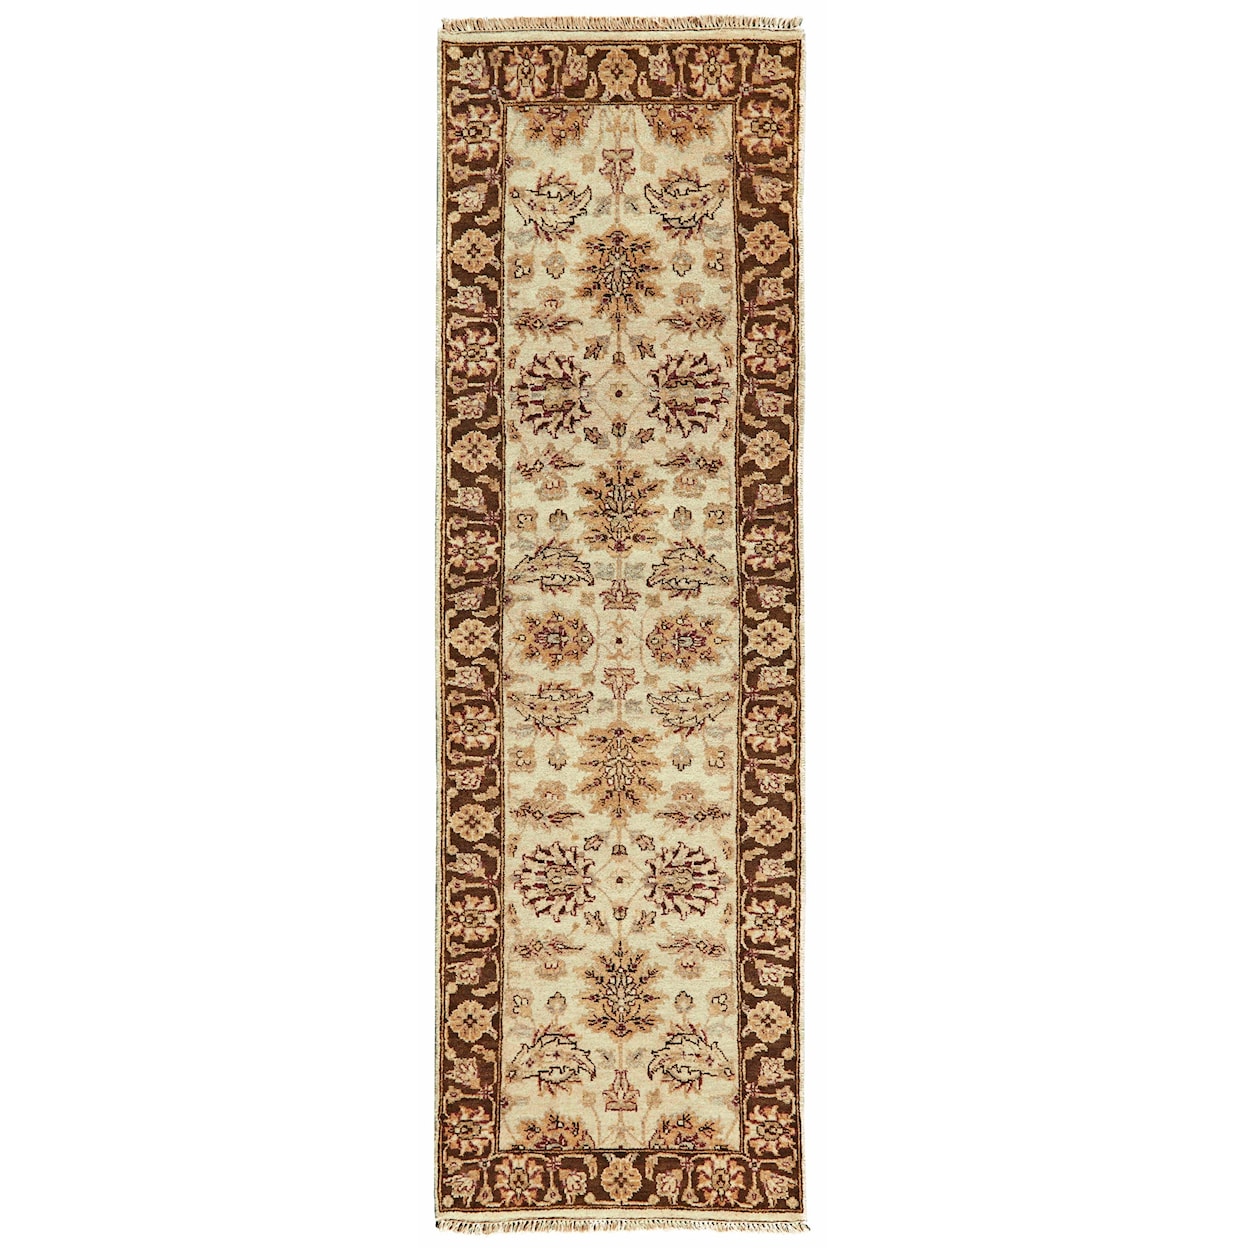 Feizy Rugs Drake Ivory/Brown 4' x 6' Area Rug